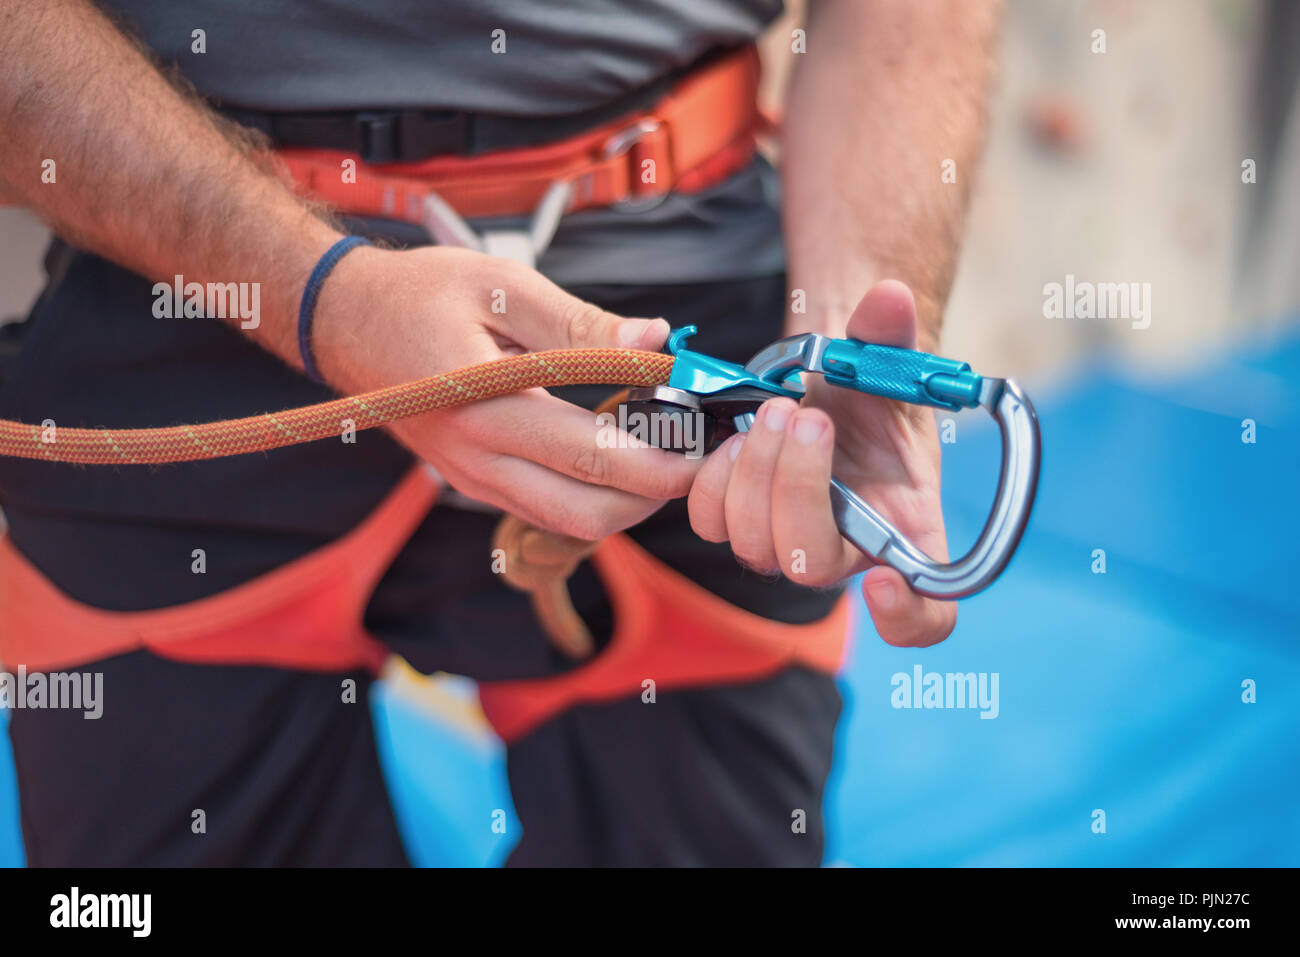 Rock wall climber wearing safety harness and climbing equipment indoor, close-up image Stock Photo